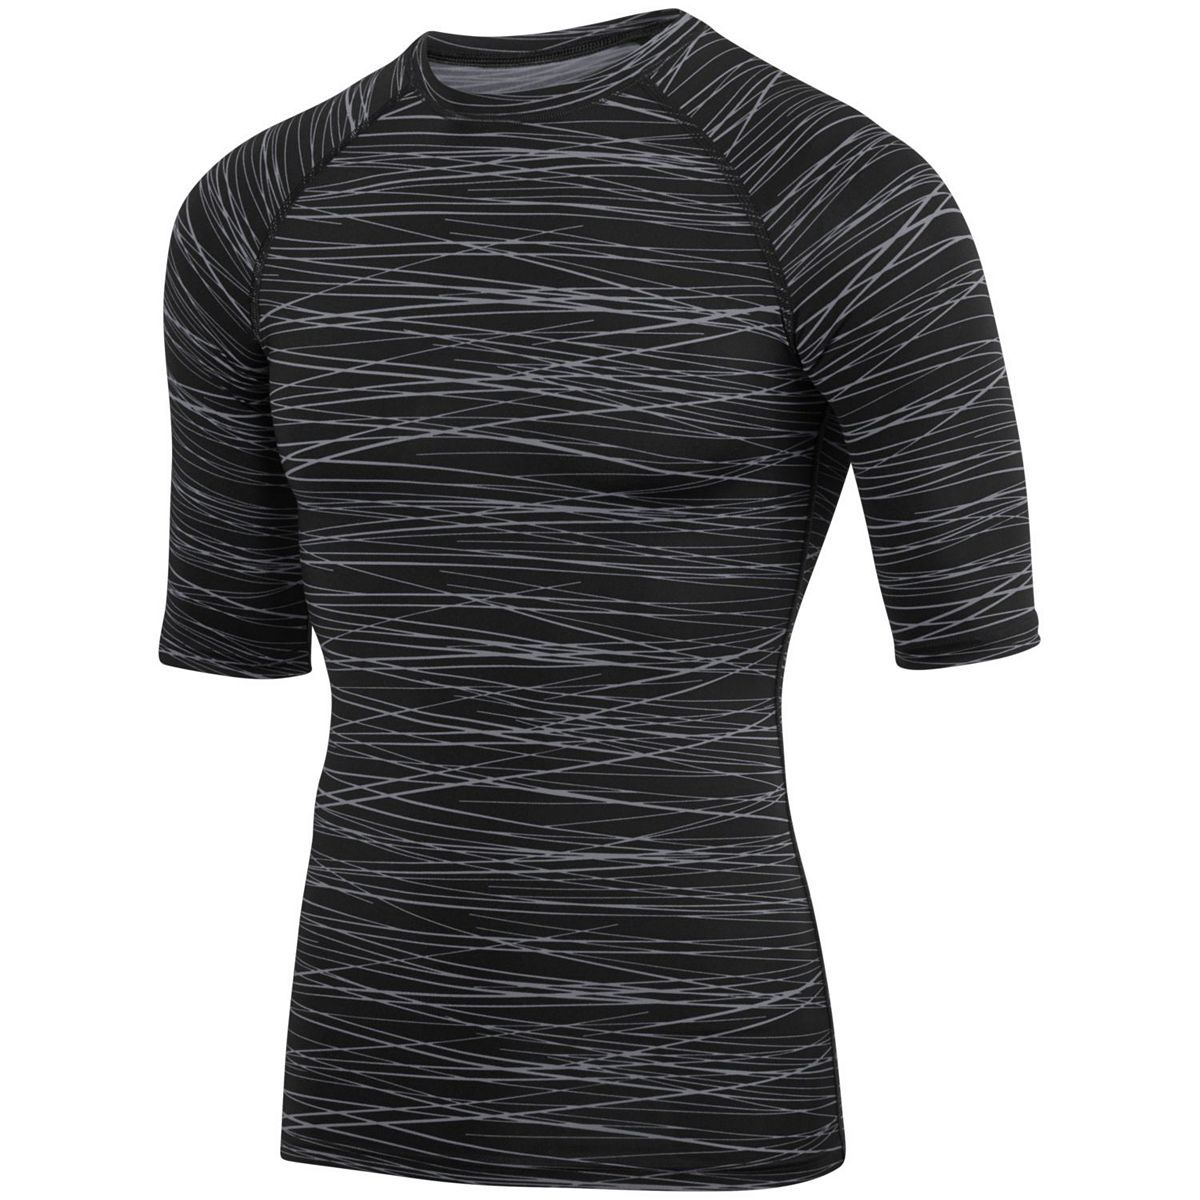 Augusta Sportswear Hyperform Compression Half Sleeve Tee in Black/Graphite Print  -Part of the Adult, Adult-Tee-Shirt, T-Shirts, Augusta-Products, Shirts product lines at KanaleyCreations.com